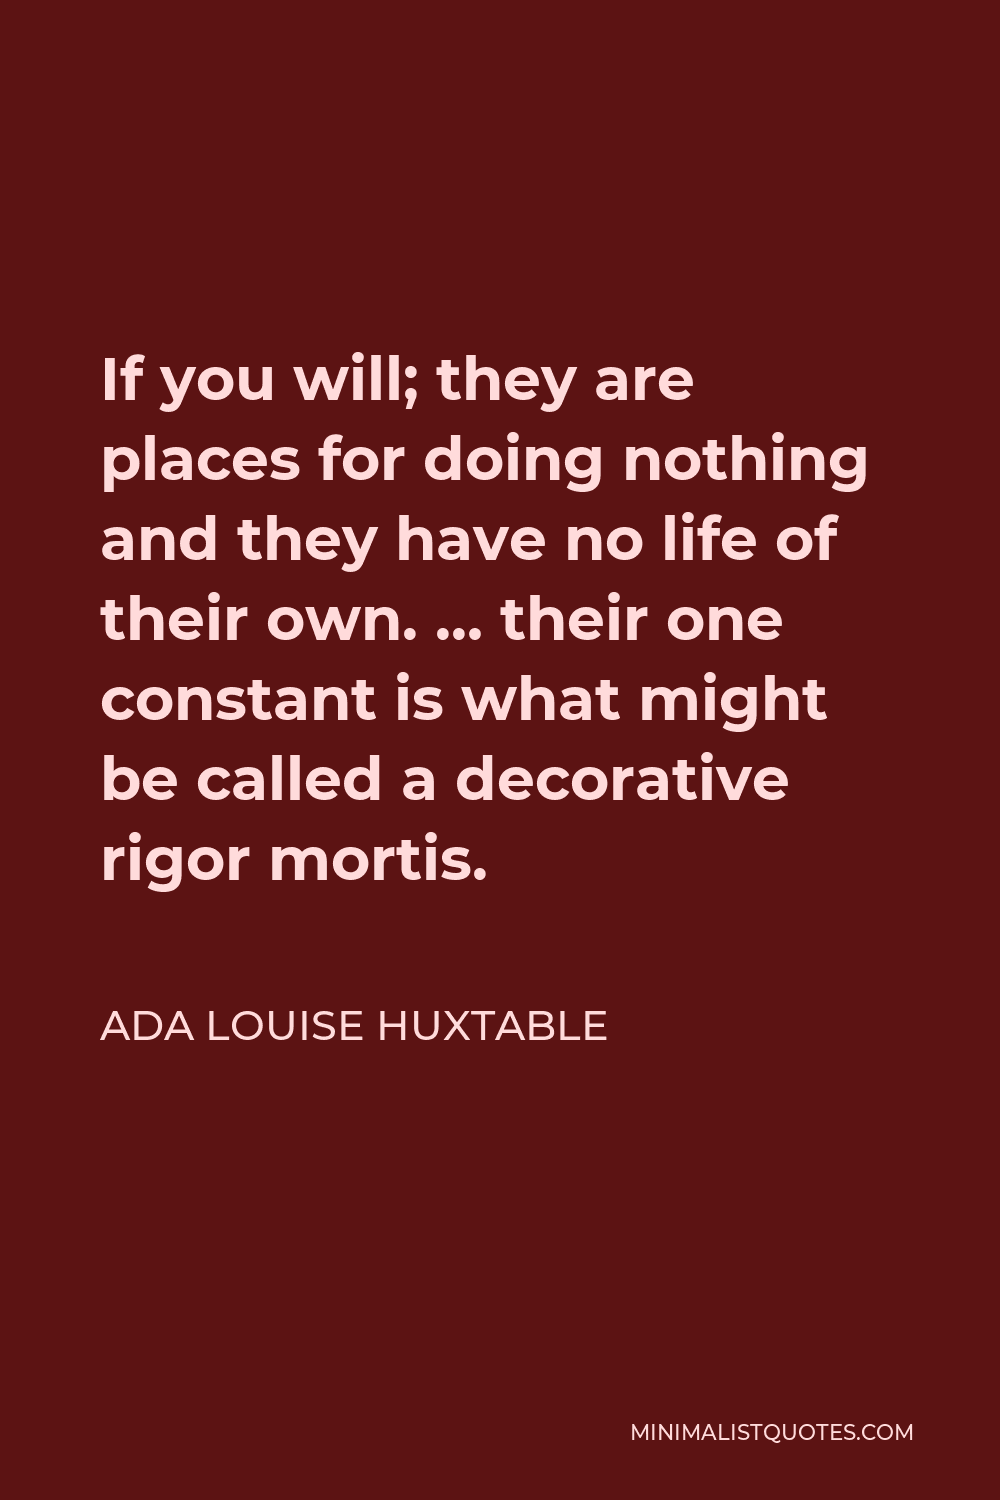 Ada Louise Huxtable Quote - If you will; they are places for doing nothing and they have no life of their own. … their one constant is what might be called a decorative rigor mortis.